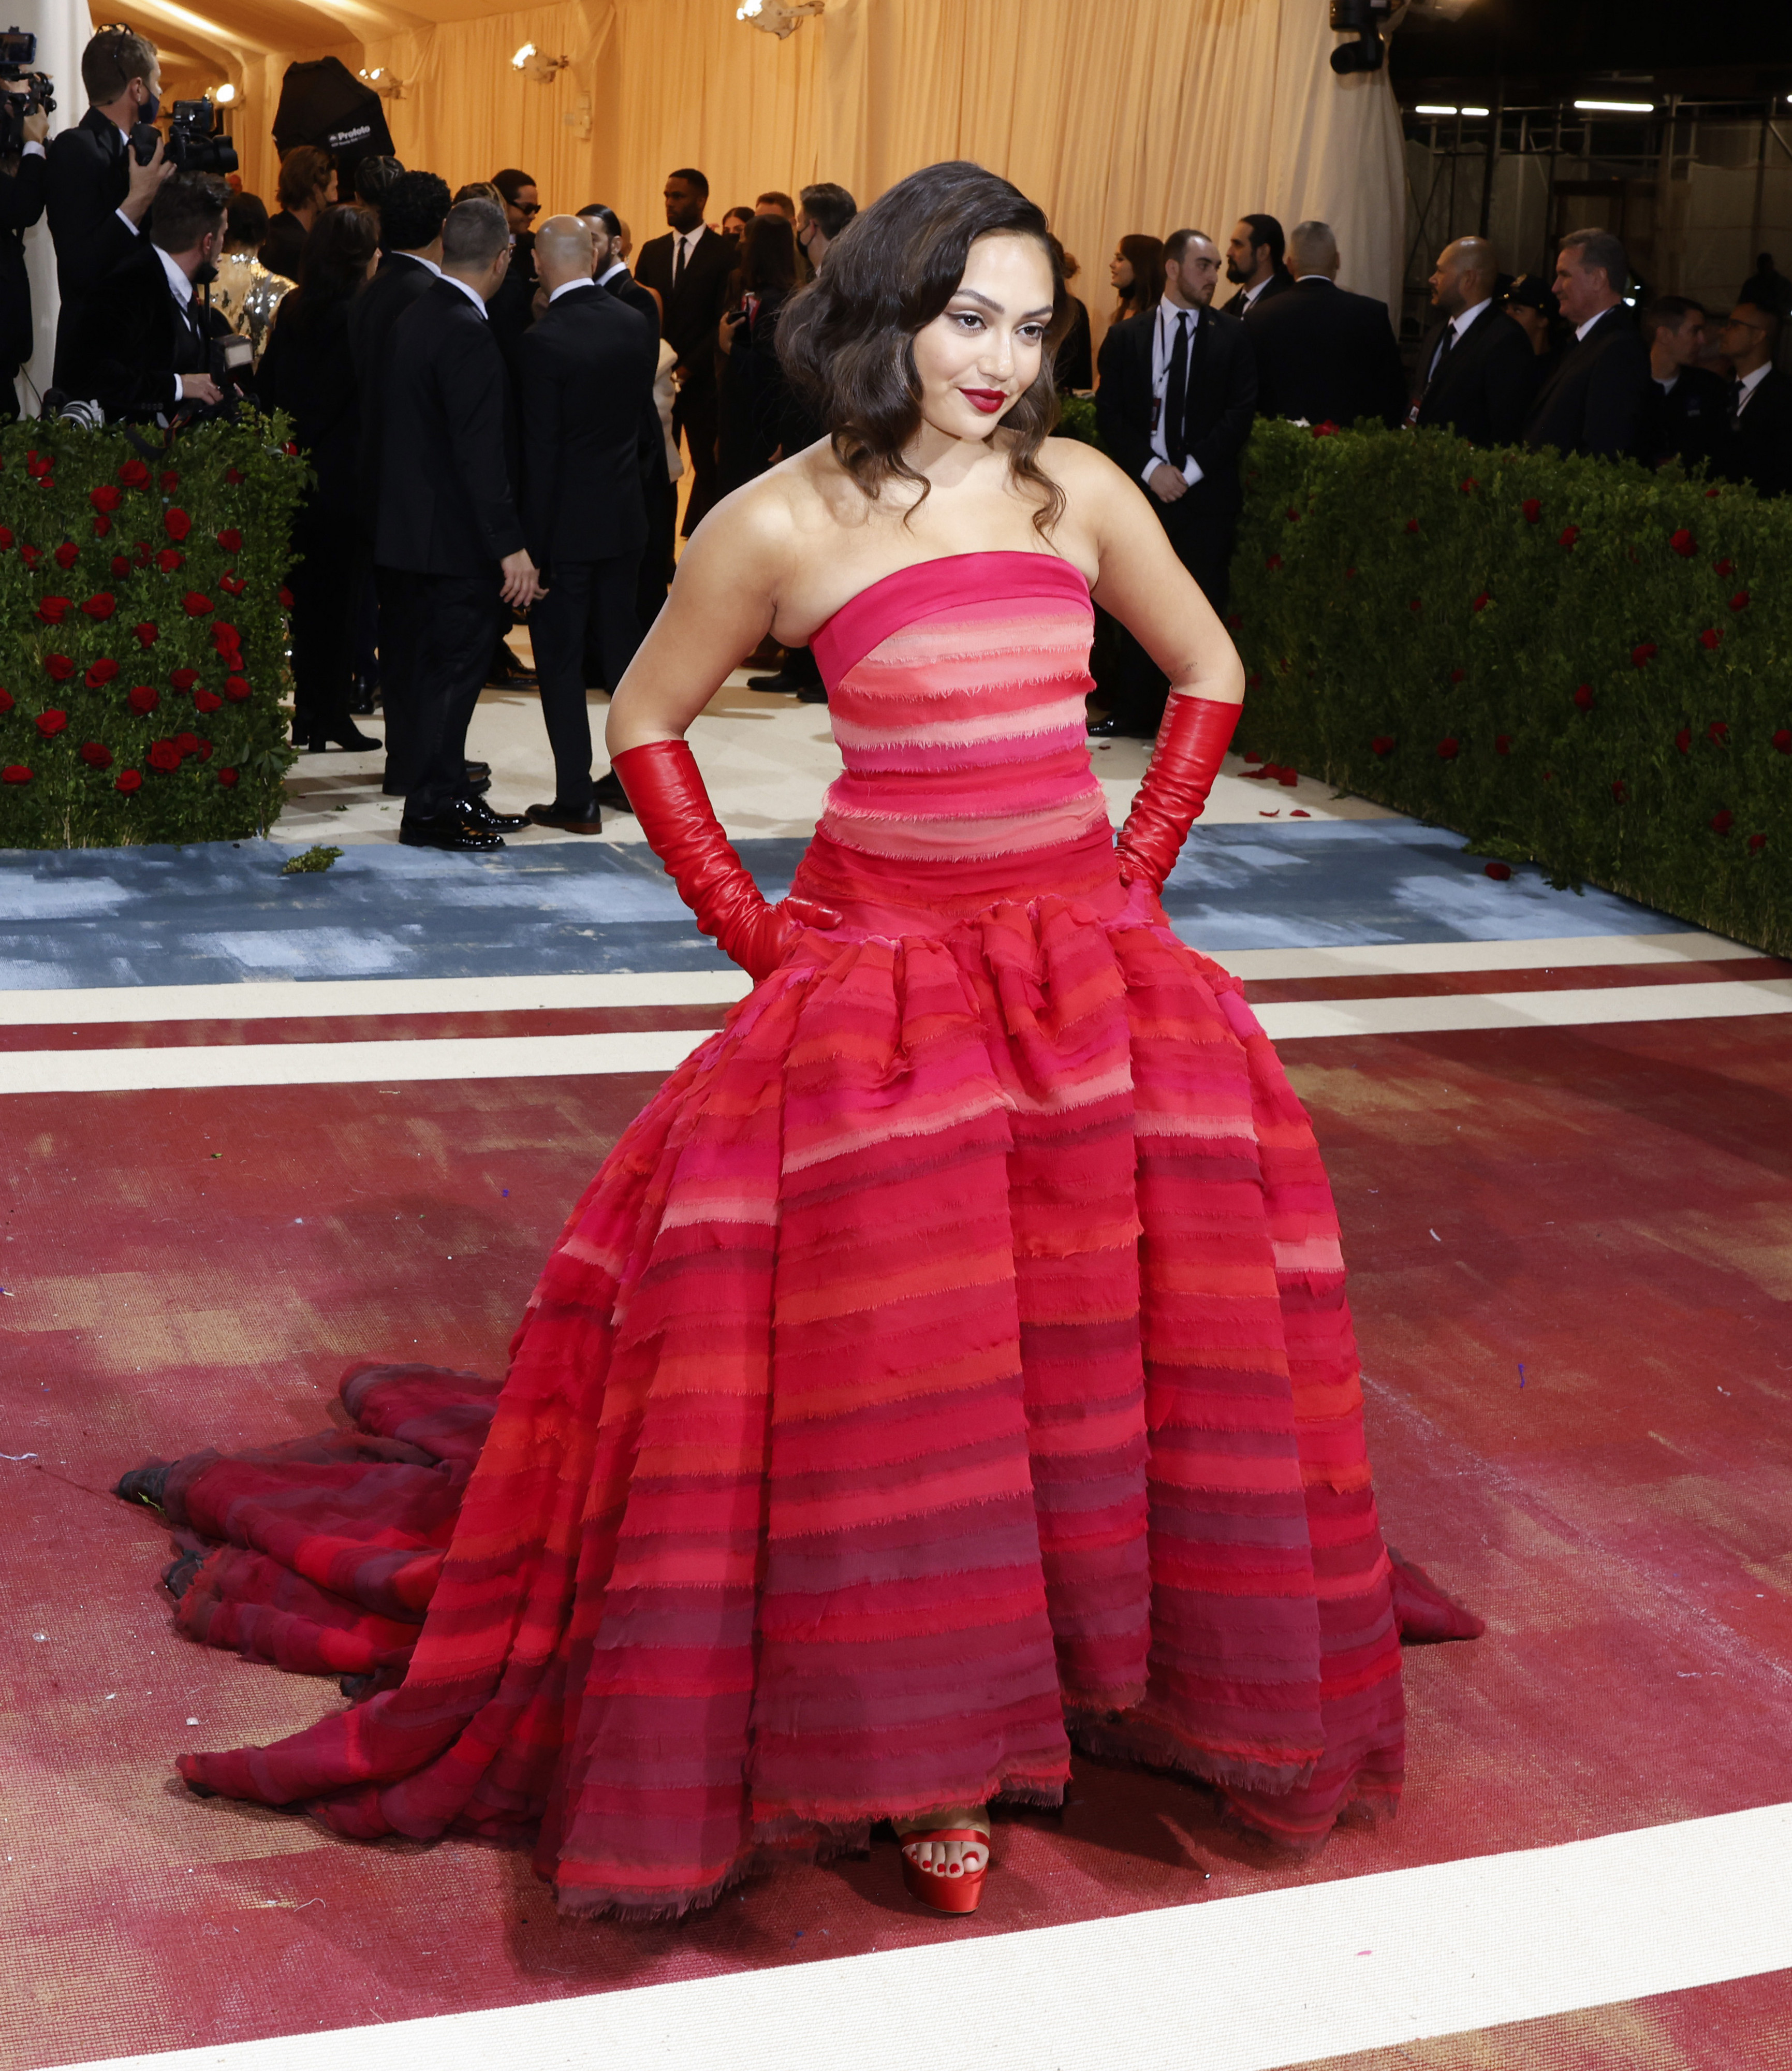 These Asian Celebrities On The Red Carpet At Met Gala 2022 Came To SLAYYYY  - Glitz by Beauty Insider